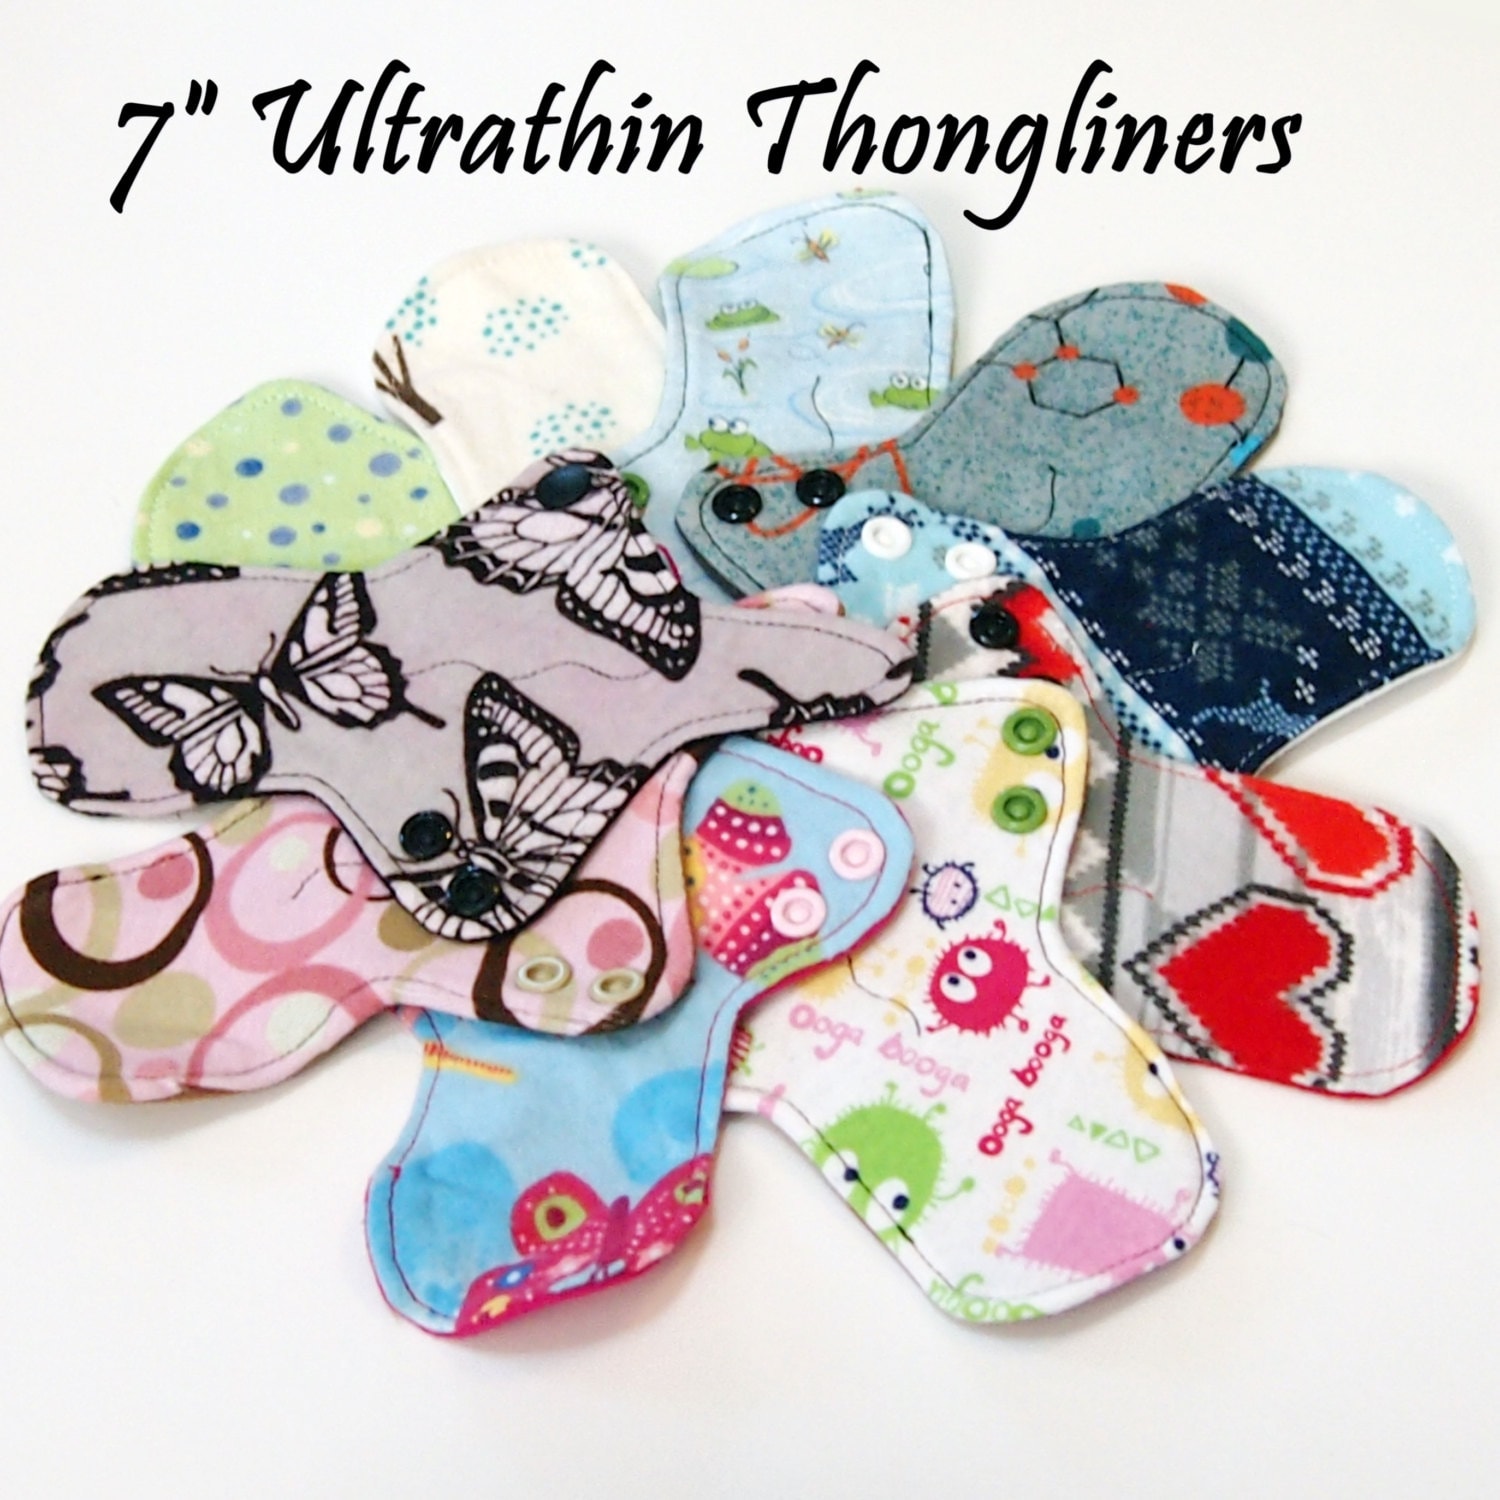 Cotton Washable Thong Panty Liners, Reusable Panty Liners, Eco